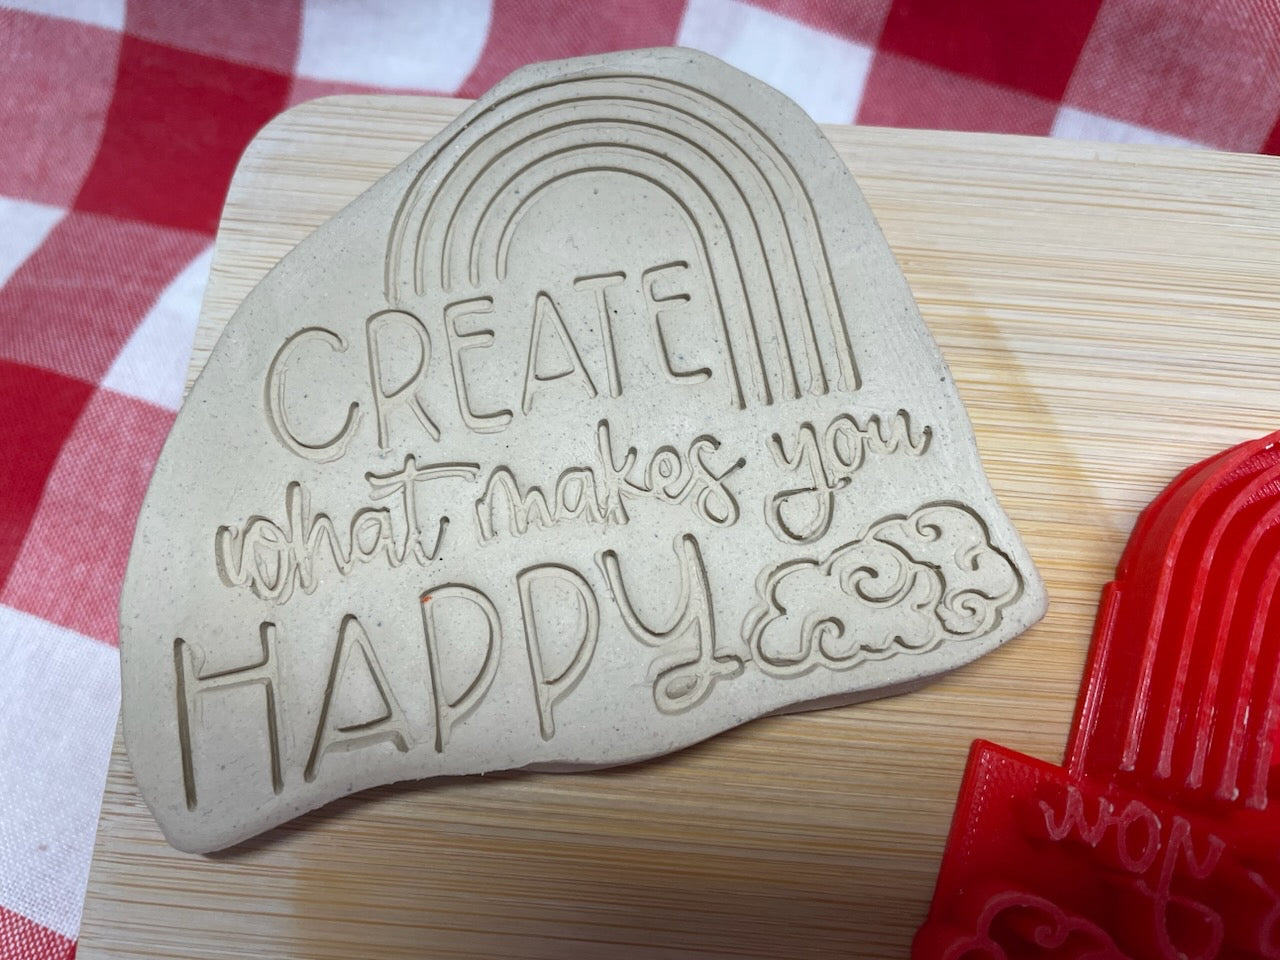 "Create What Makes You Happy" word stamp - November 2023 mystery box, multiple sizes available